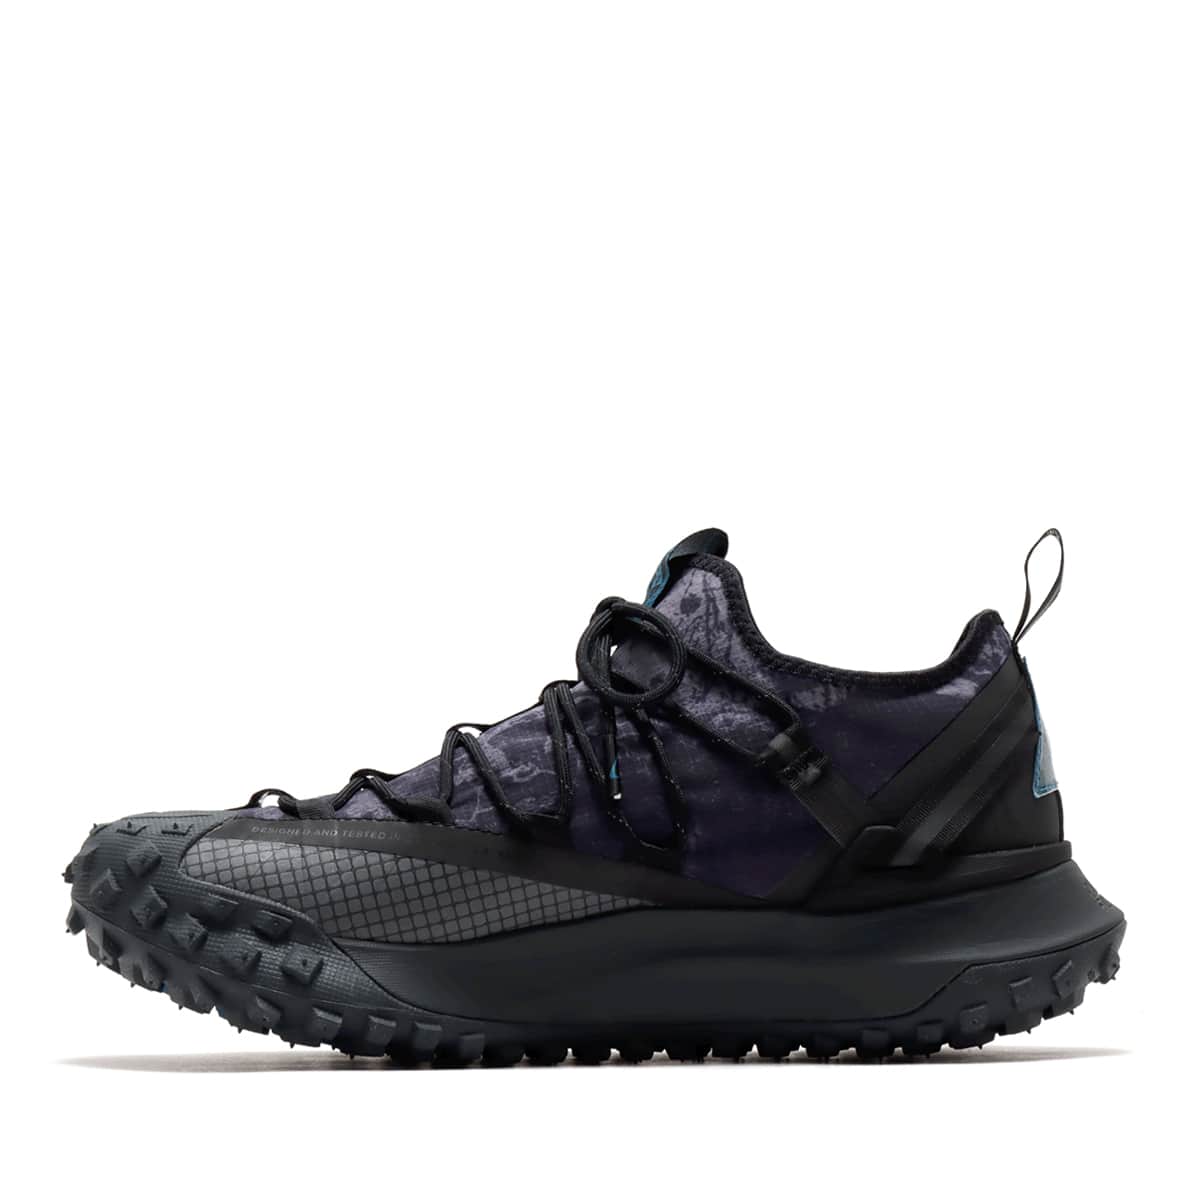 NIKE ACG MOUNTAIN FLY LOW BLACK/BLACK-GREEN ABYSS 21SU-S